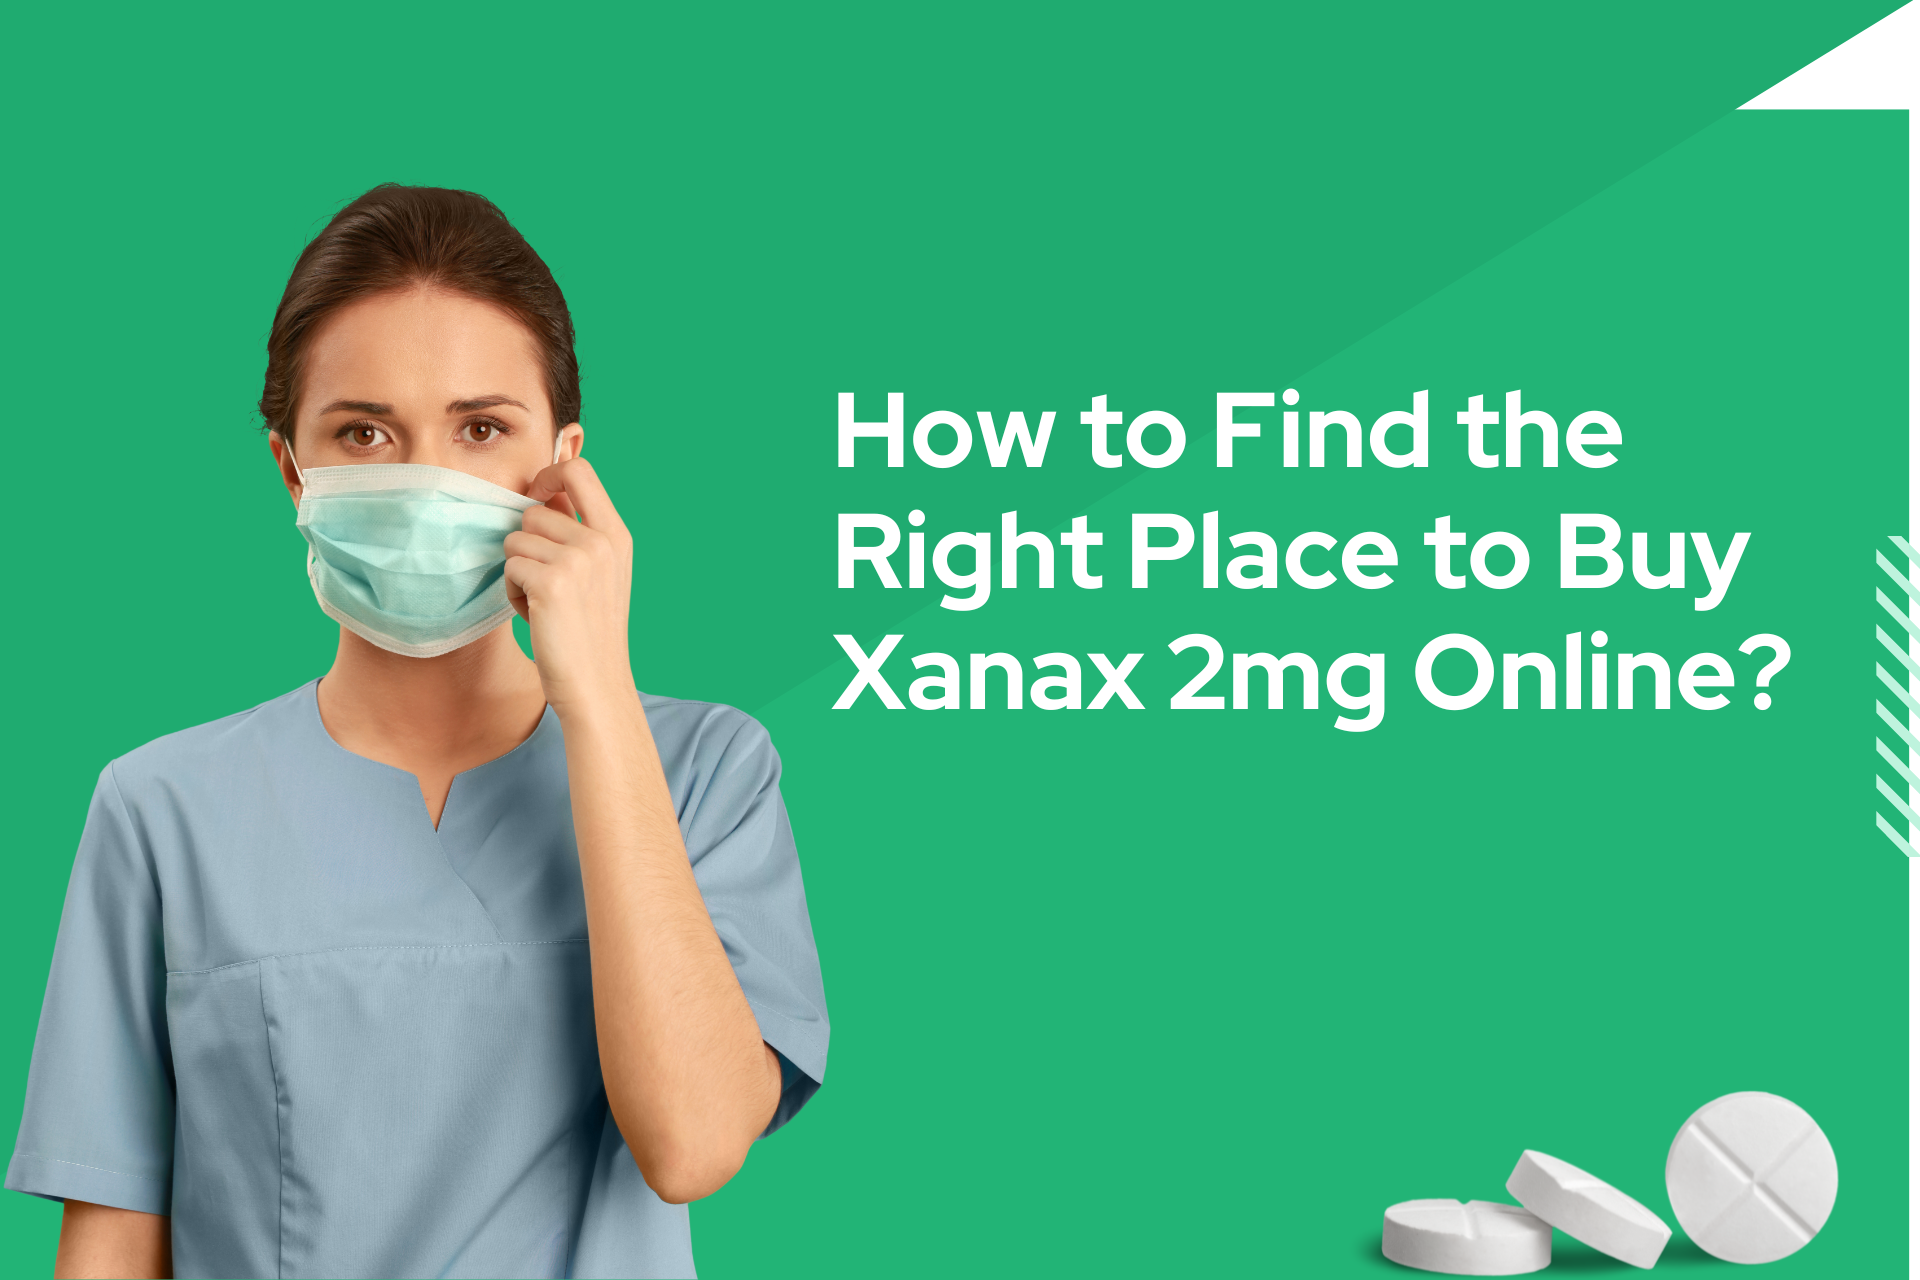 Online Pharmacies: How to Find the Right Place to Buy Xanax 2mg Online?